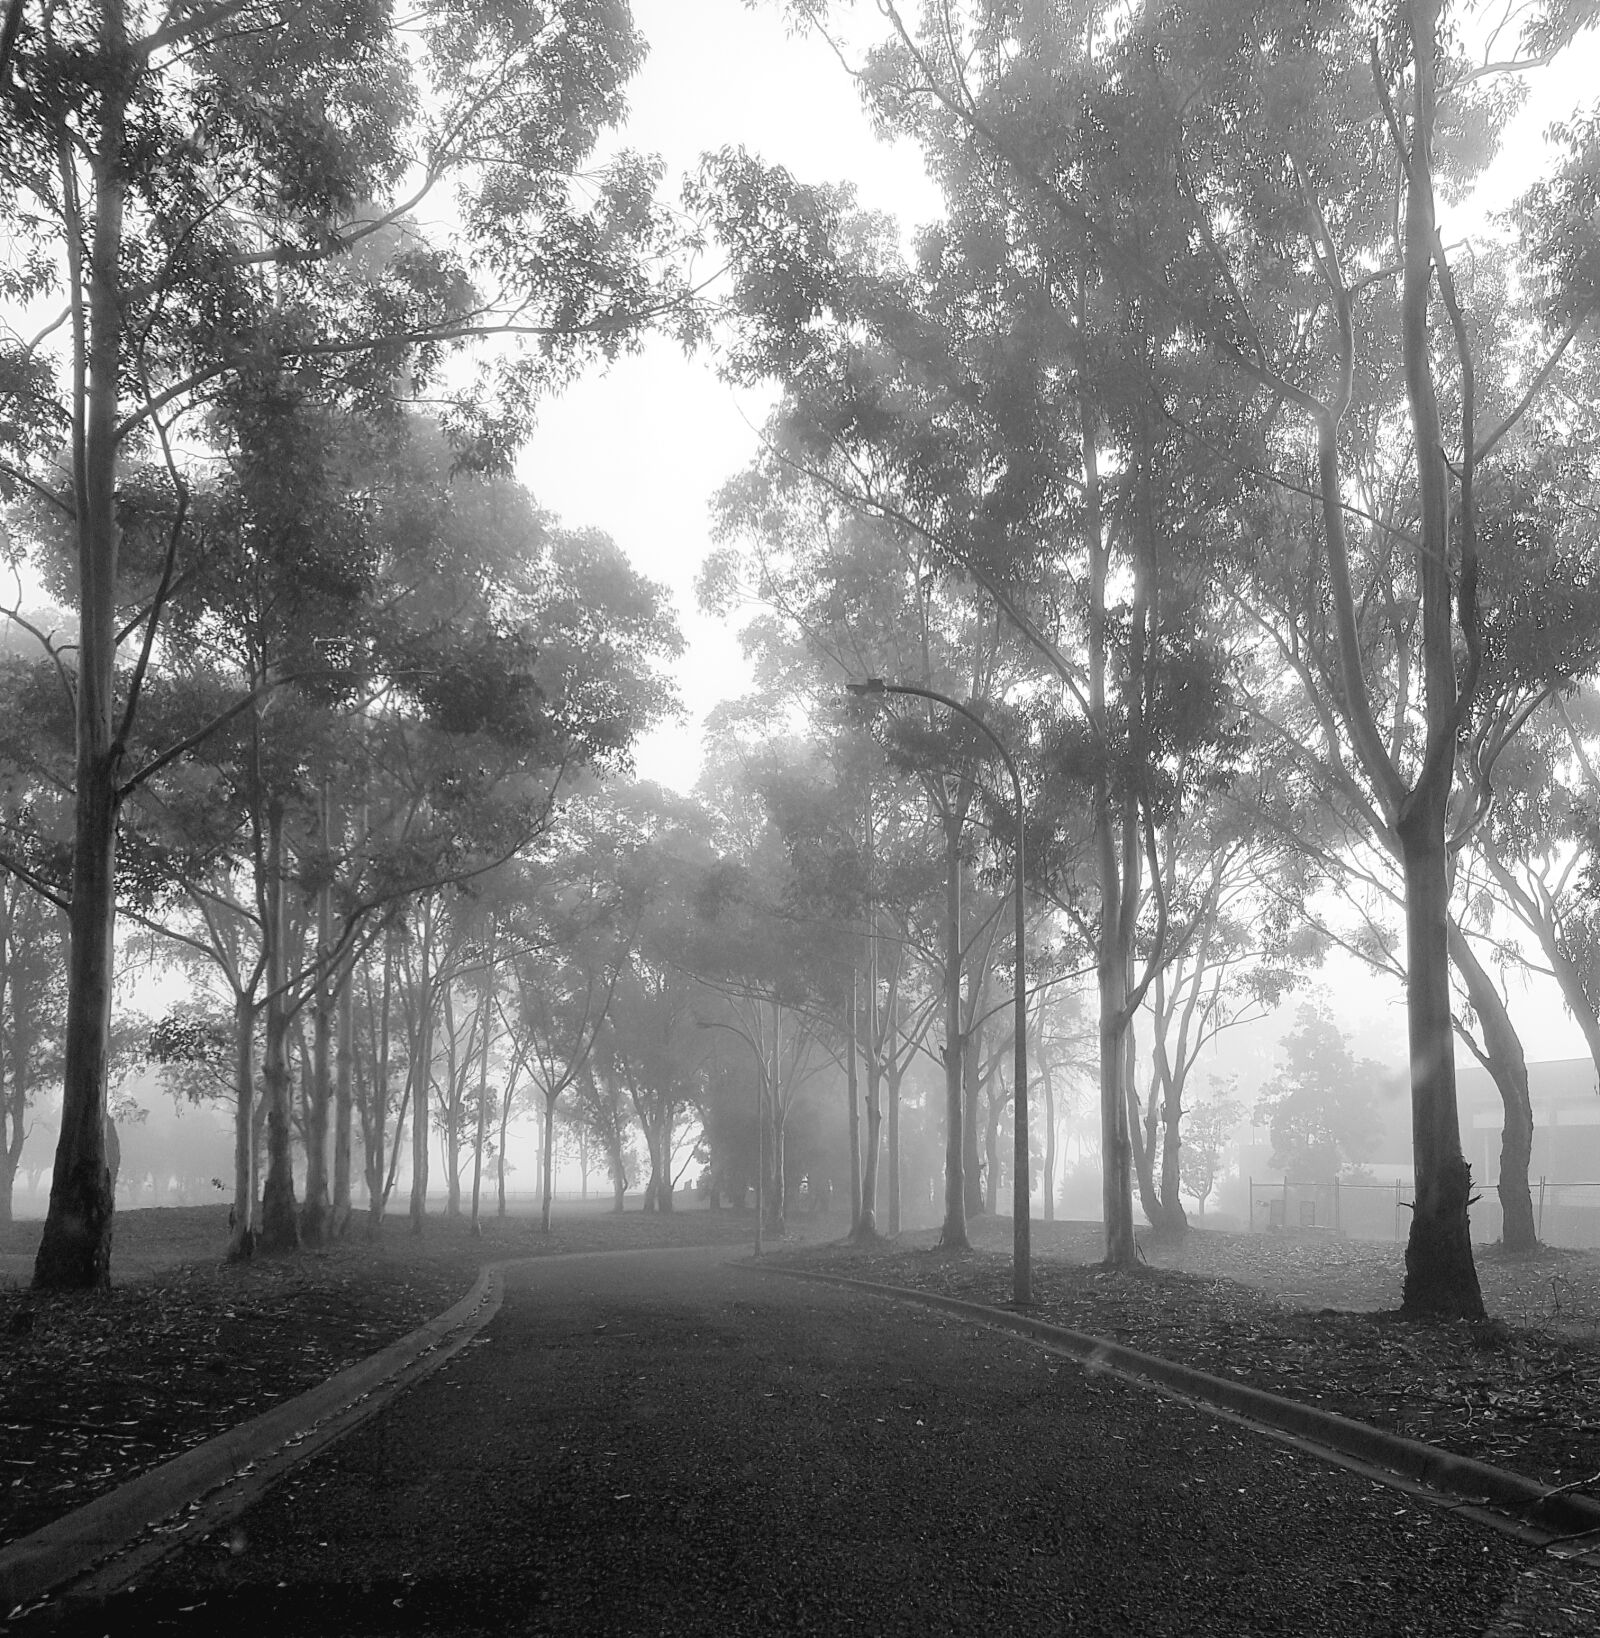 Samsung Galaxy S7 sample photo. Country, road, fog, greyscale photography